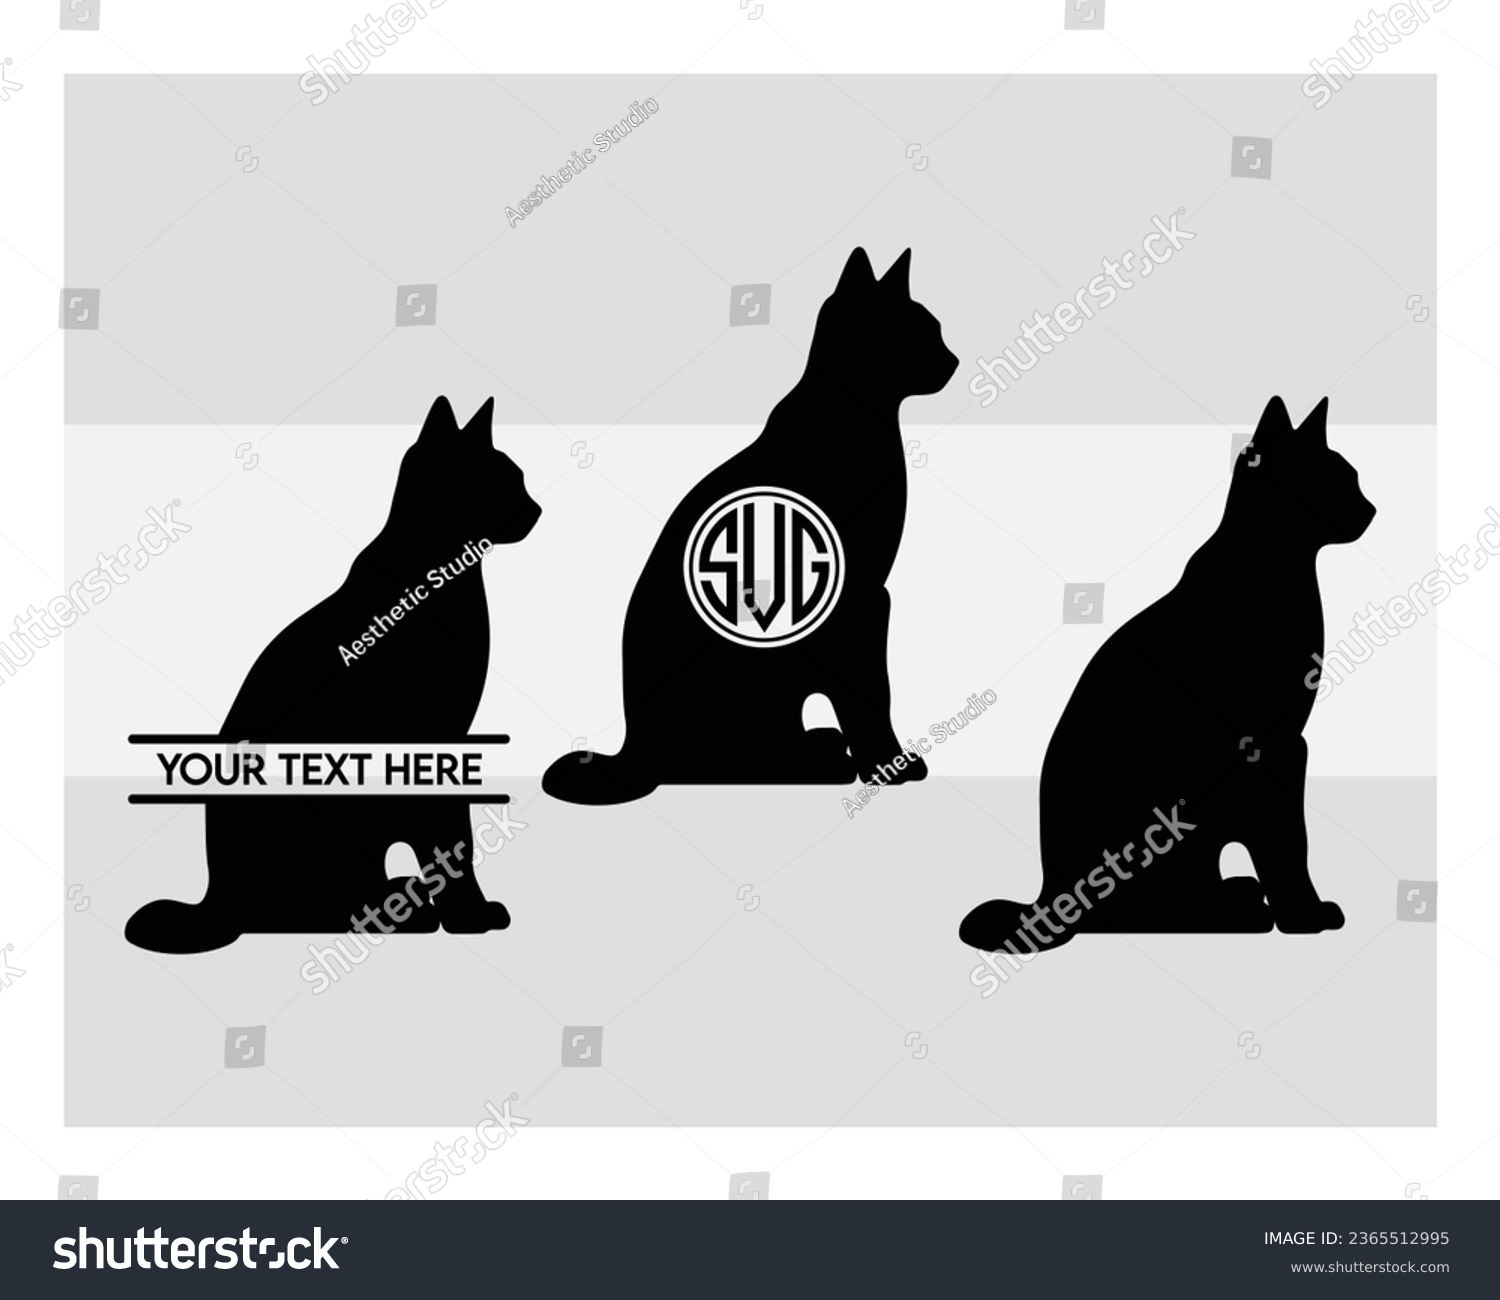 SVG of Cat Svg, Cats, Baby Elephant Baby, Cats Silhouette, Cats Funny, cat bunny, Cute, Cats Black, Animal Svg, Animal Silhouette svg